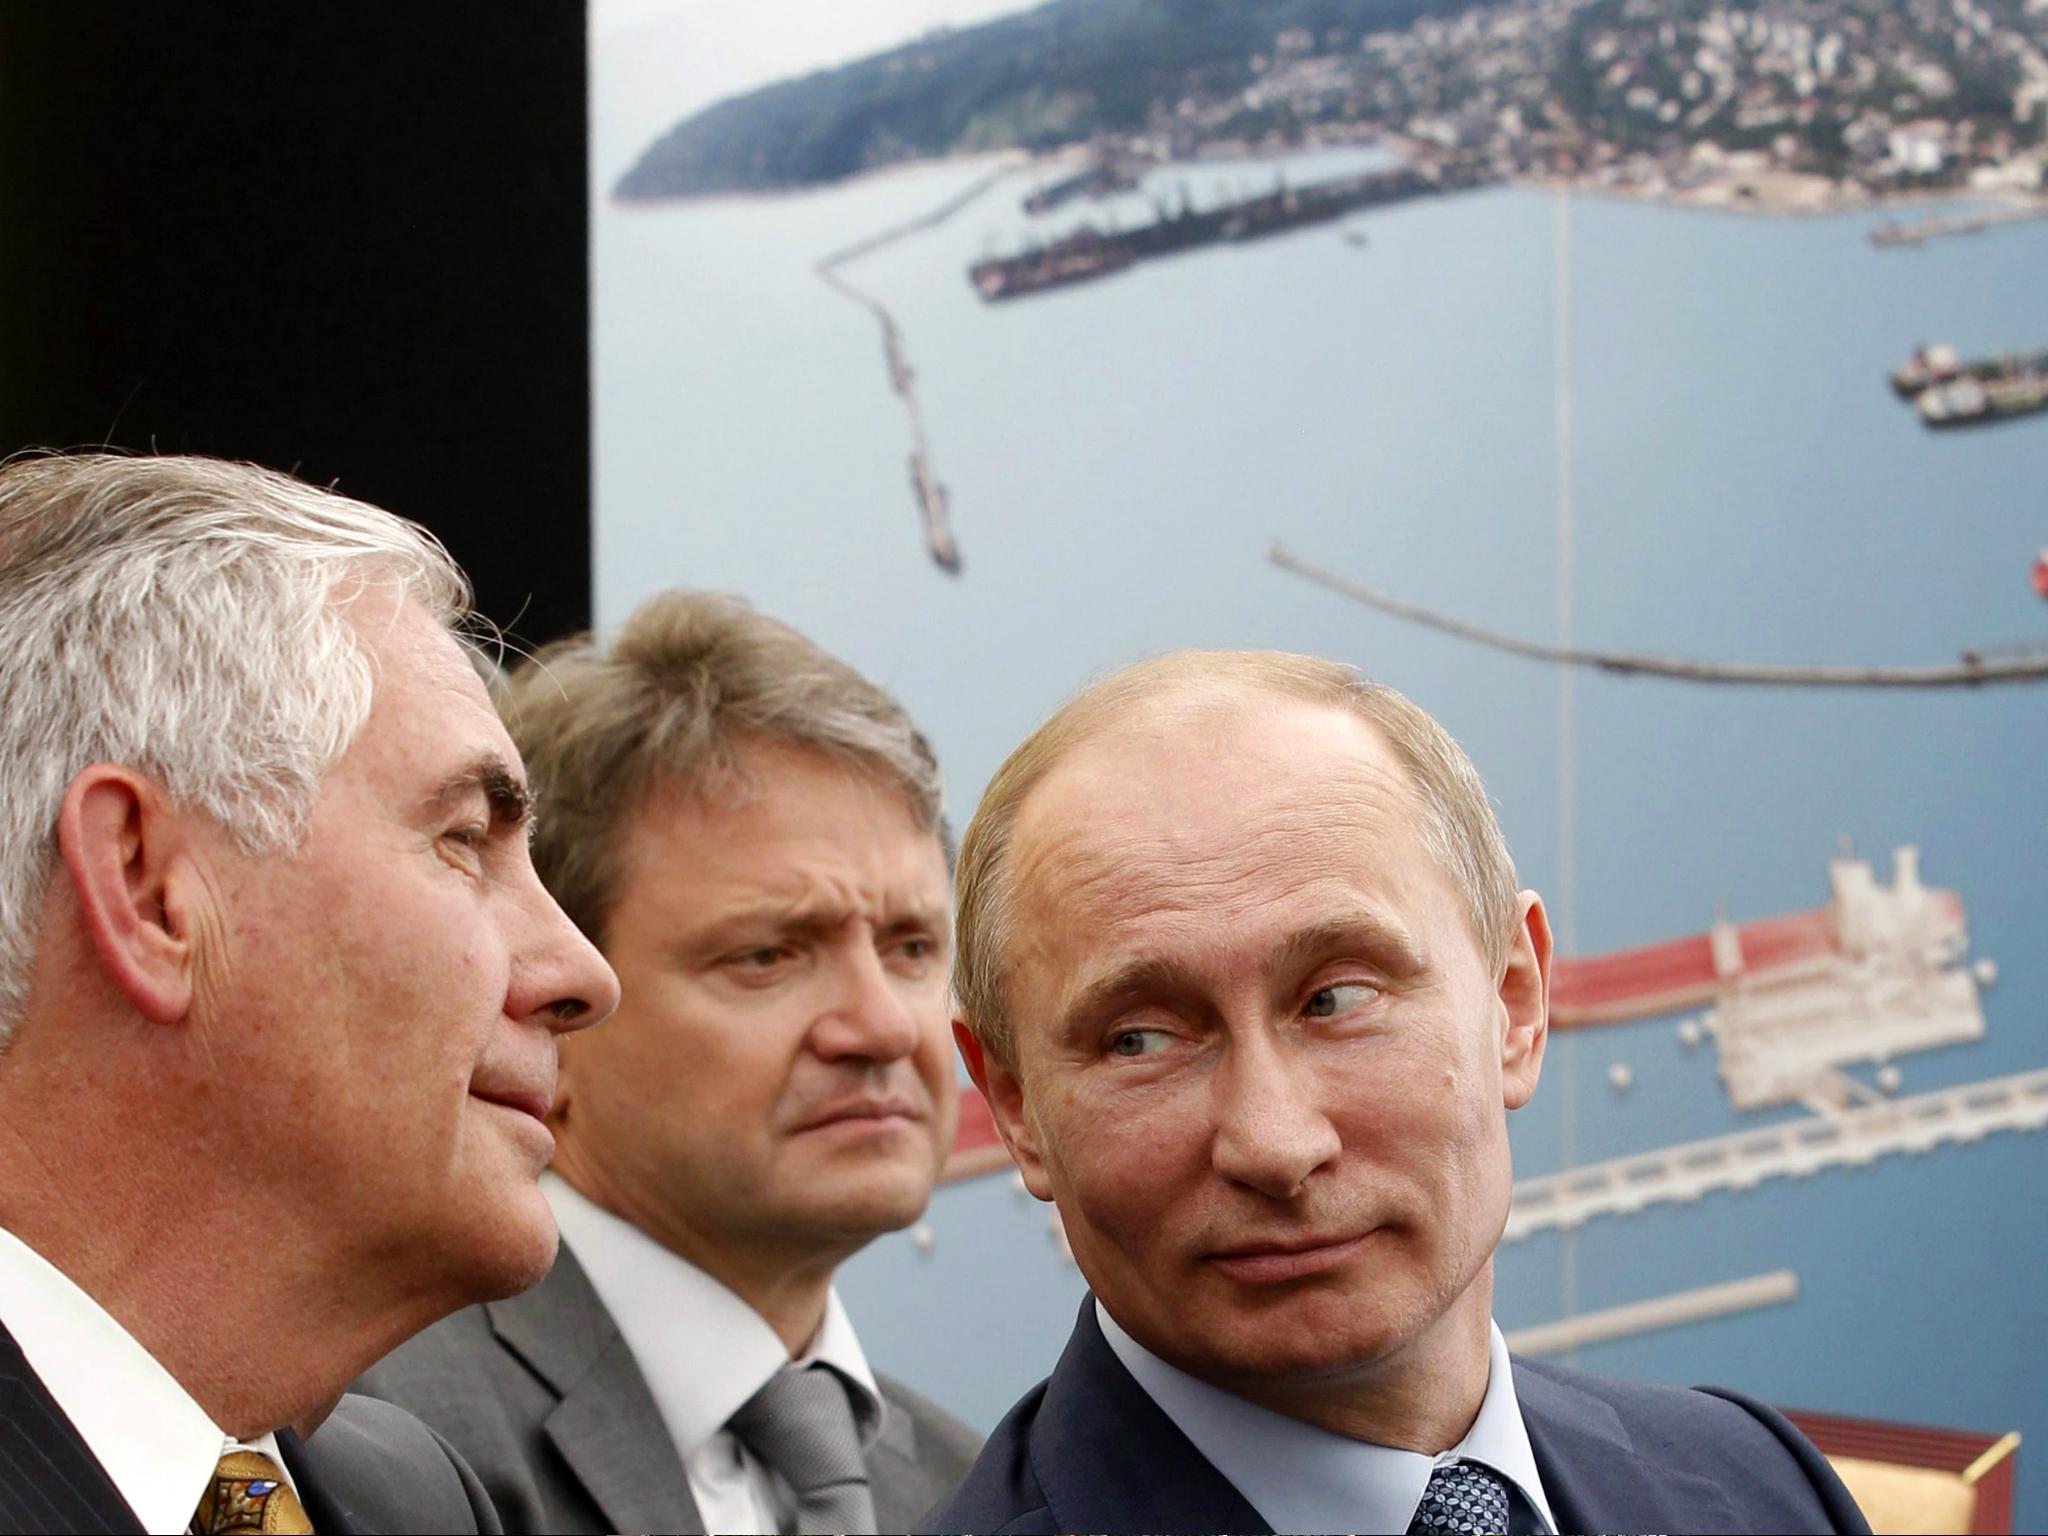 Russia's President Vladimir Putin (R) and ExxonMobil Chairman and CEO Rex Tillerson (L) attend at the ceremony of the signing of an agreement between state-controlled Russian oil company Rosneft and ExxonMobil in June 2012